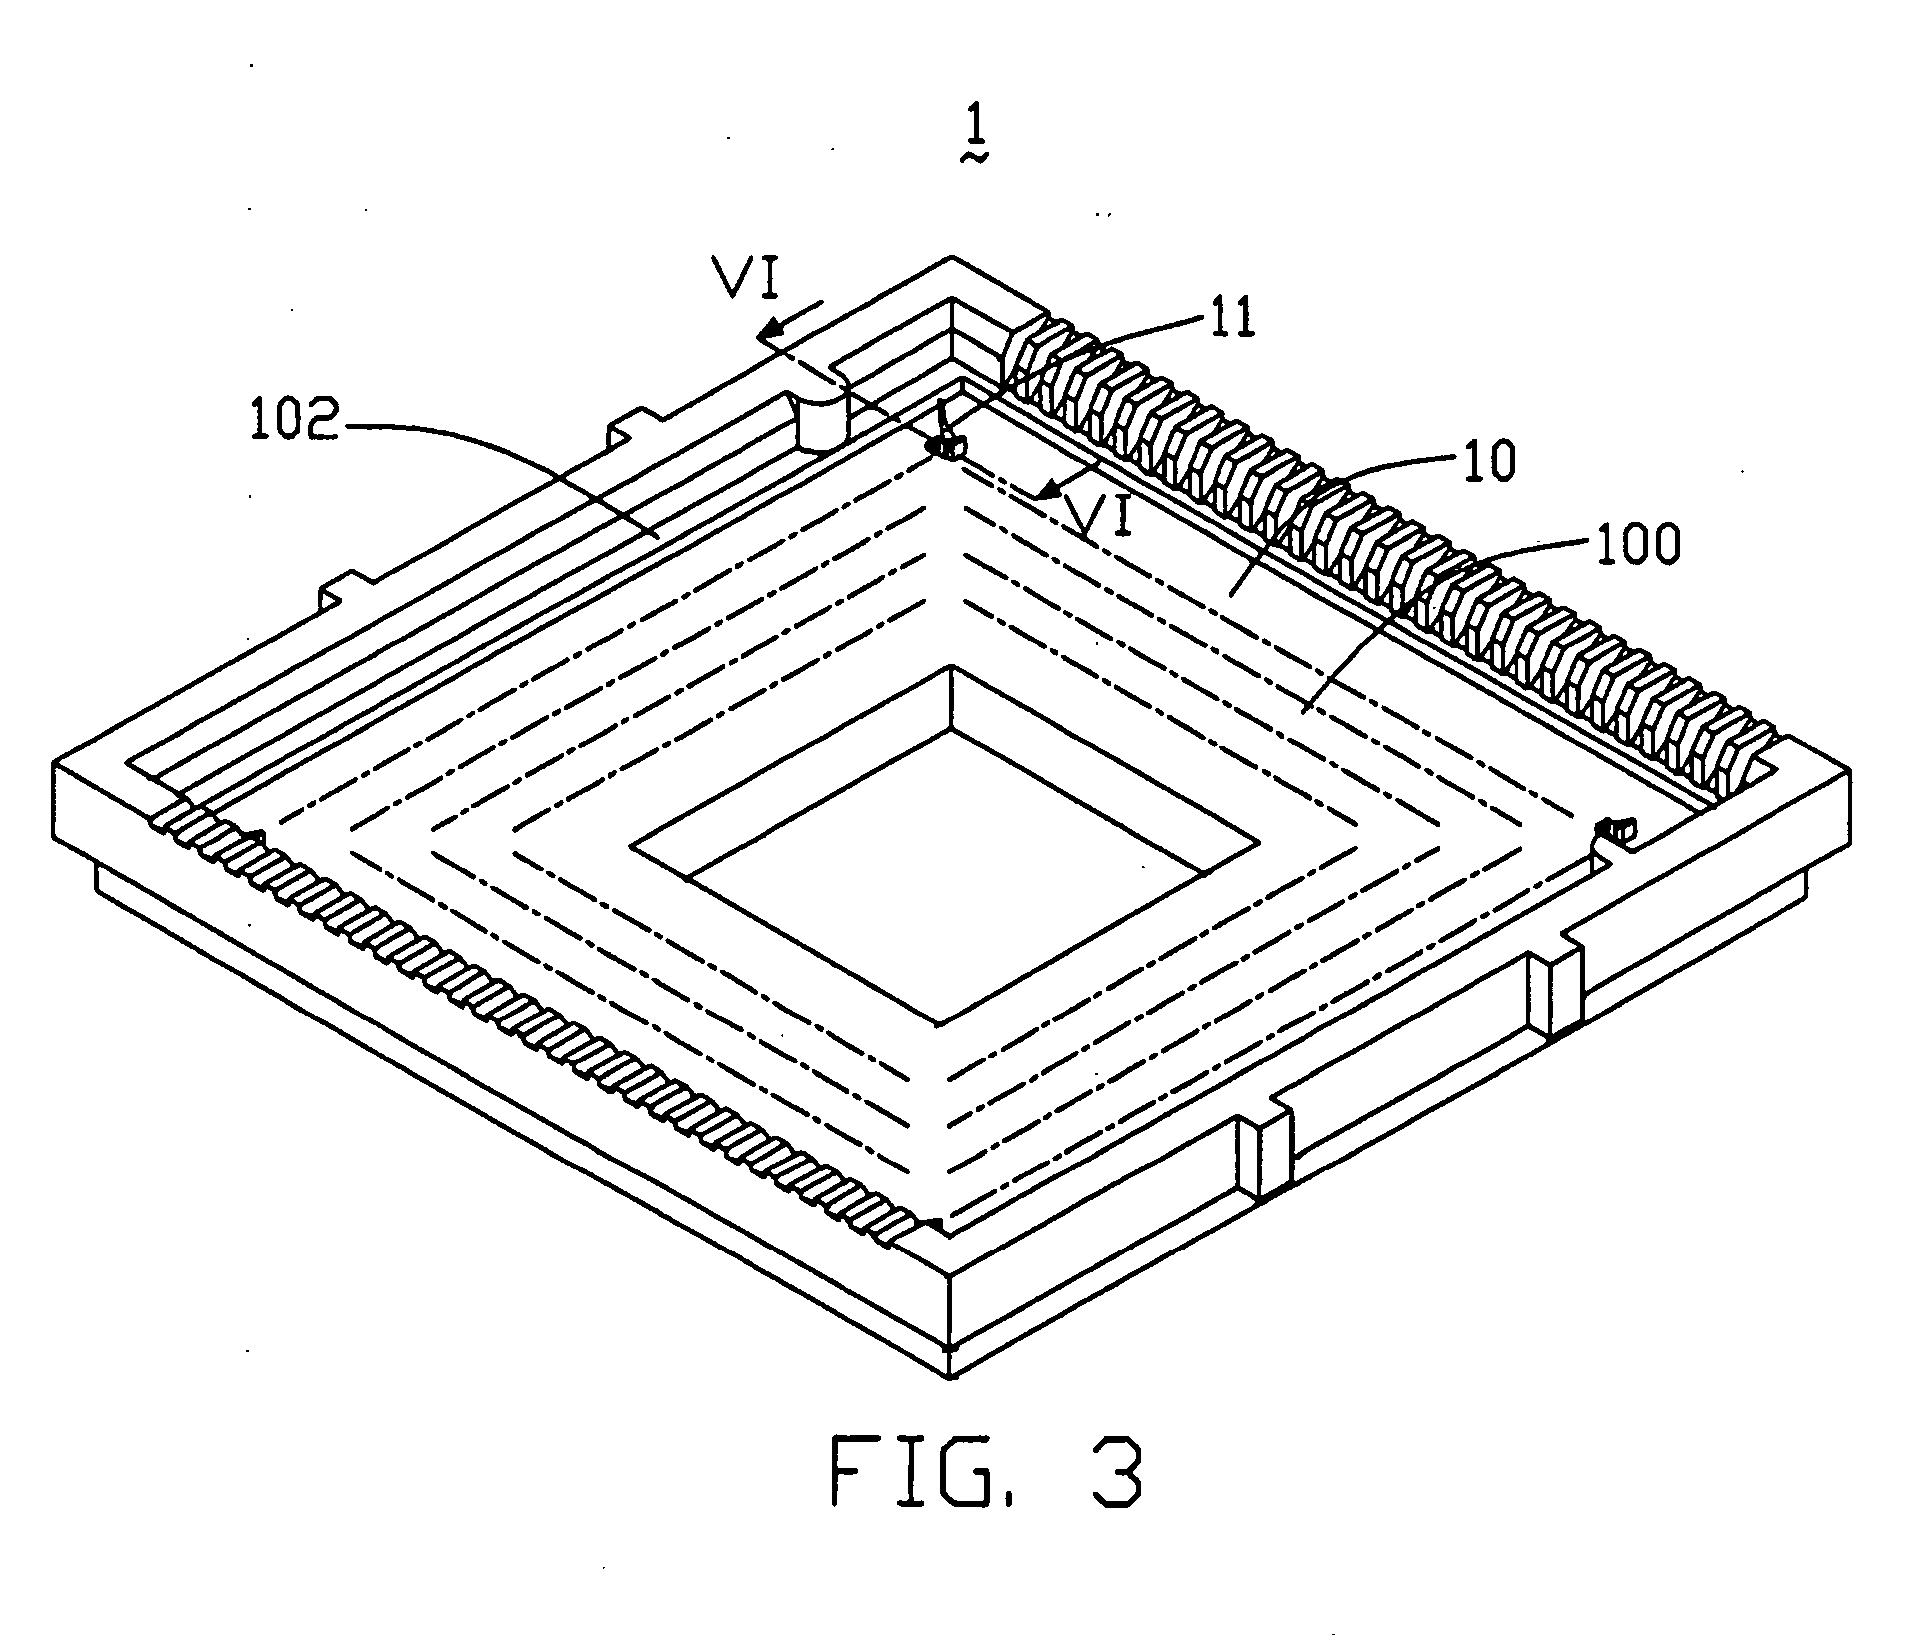 Electrical connector with dual-function housing protrusions